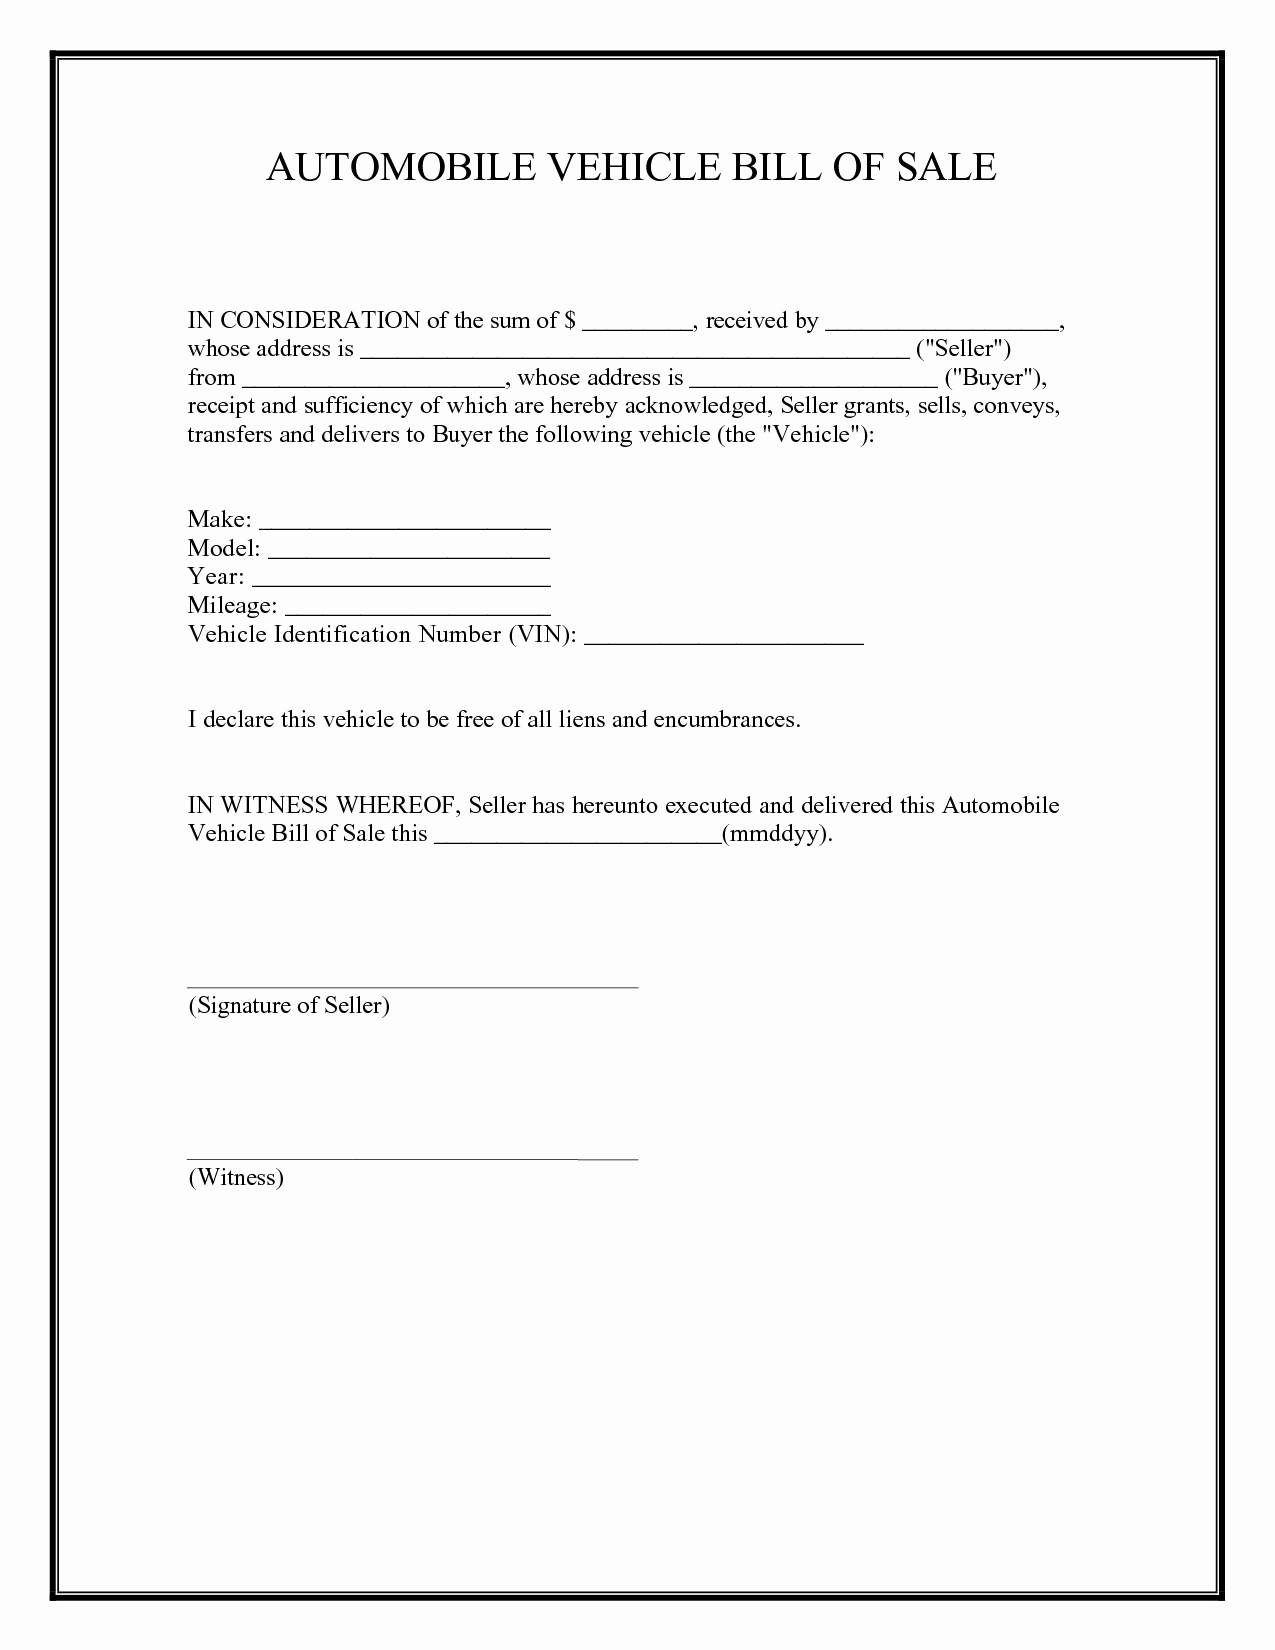 Example Car Bill Of Sale Best Of Vehicle Bill Sale Free Printable Documents